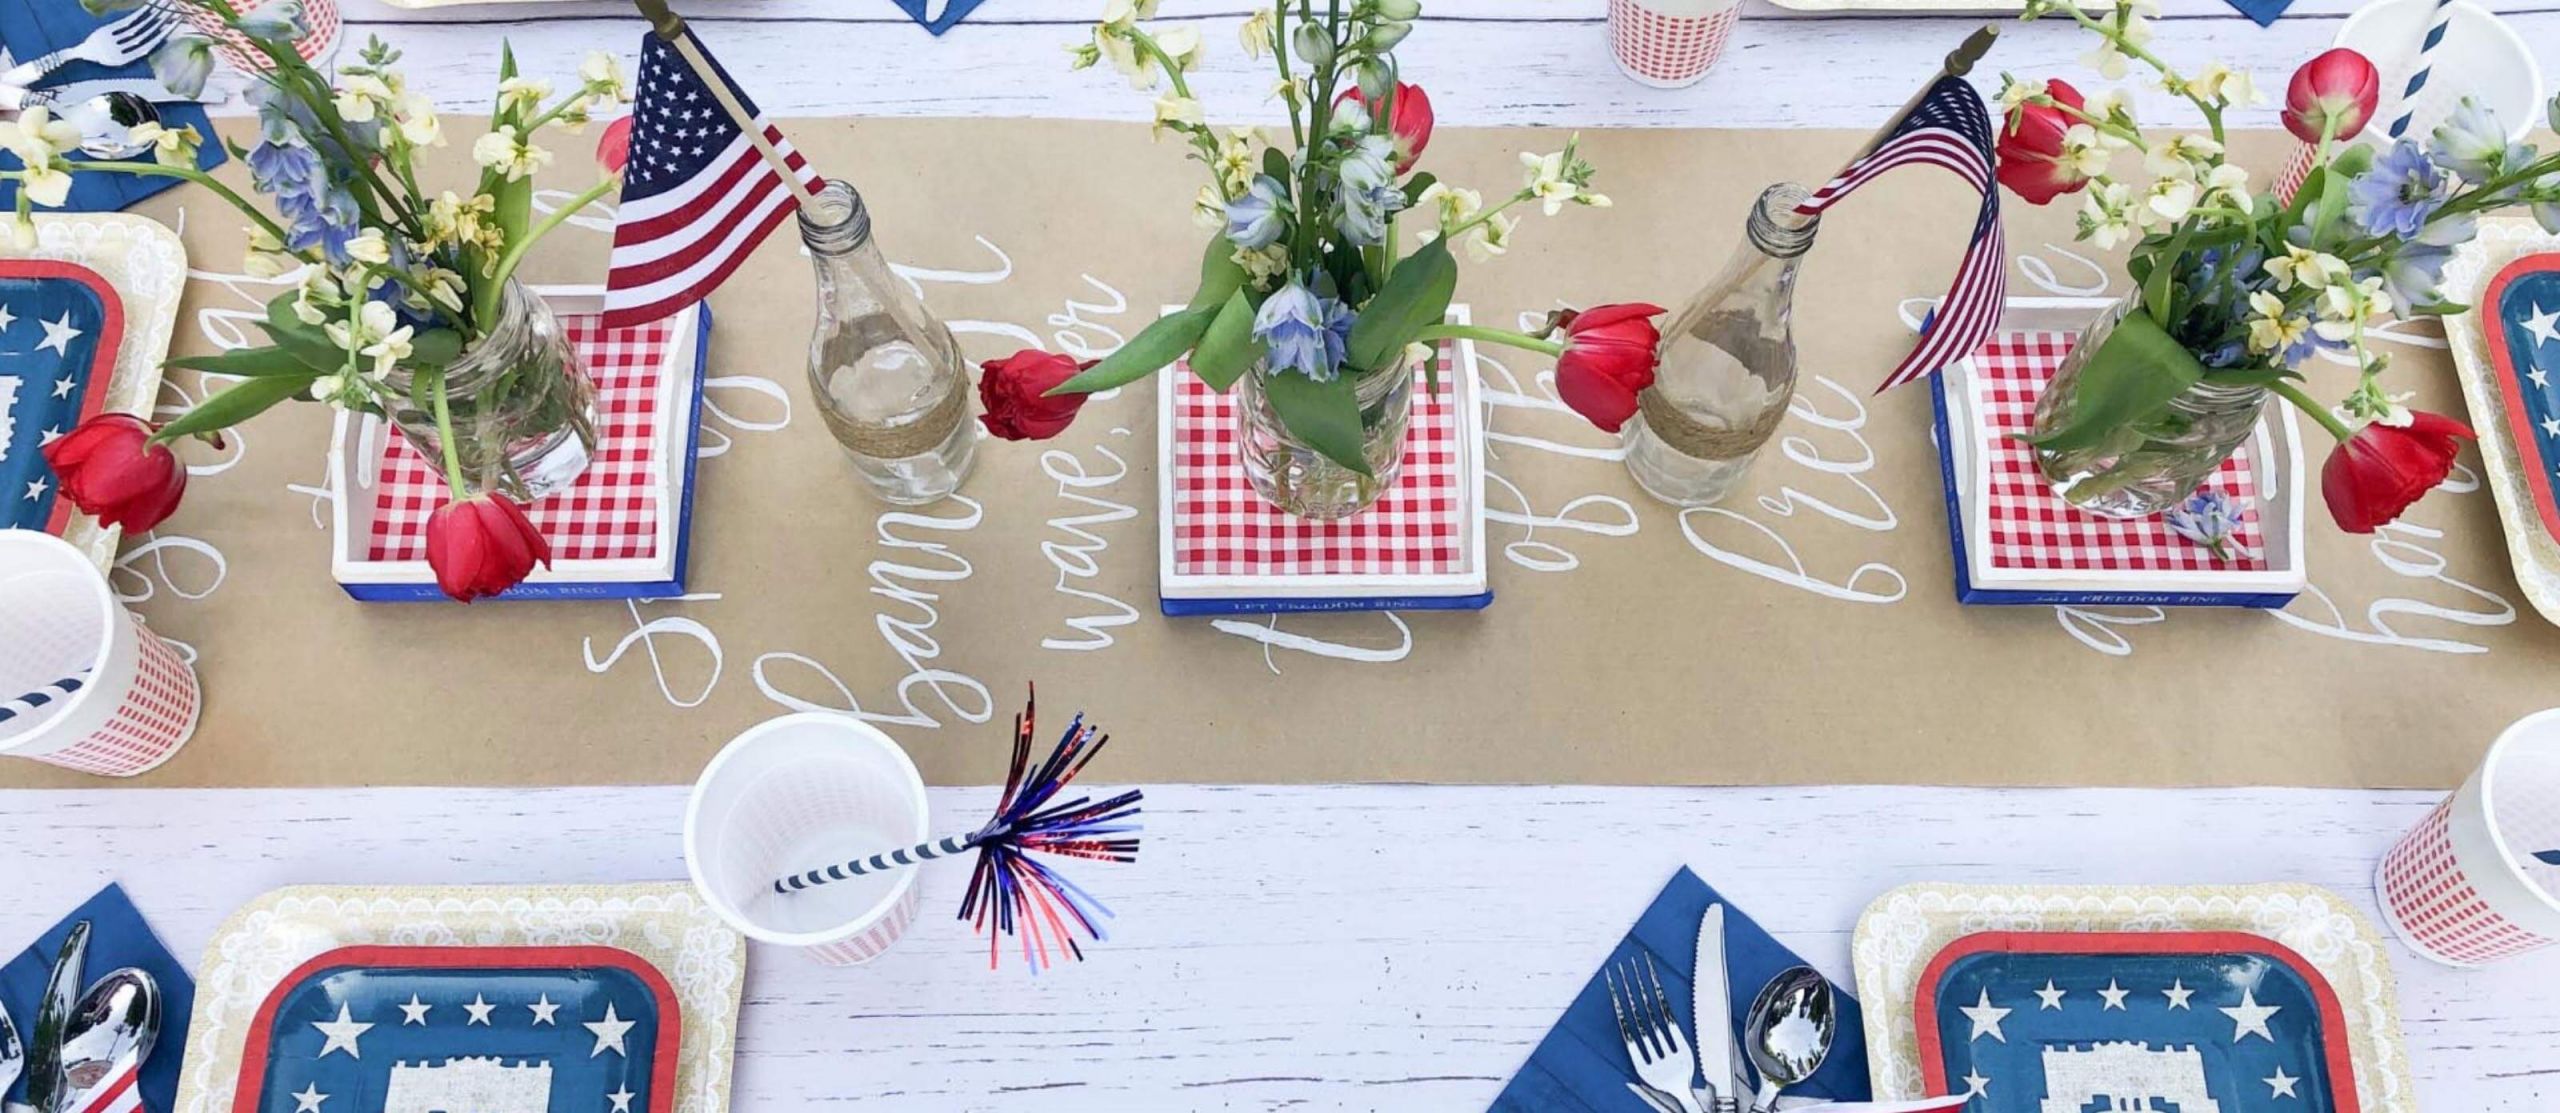 Holiday Party Ideas 2020
 70 Best Memorial Day Decorations Ideas with 2020